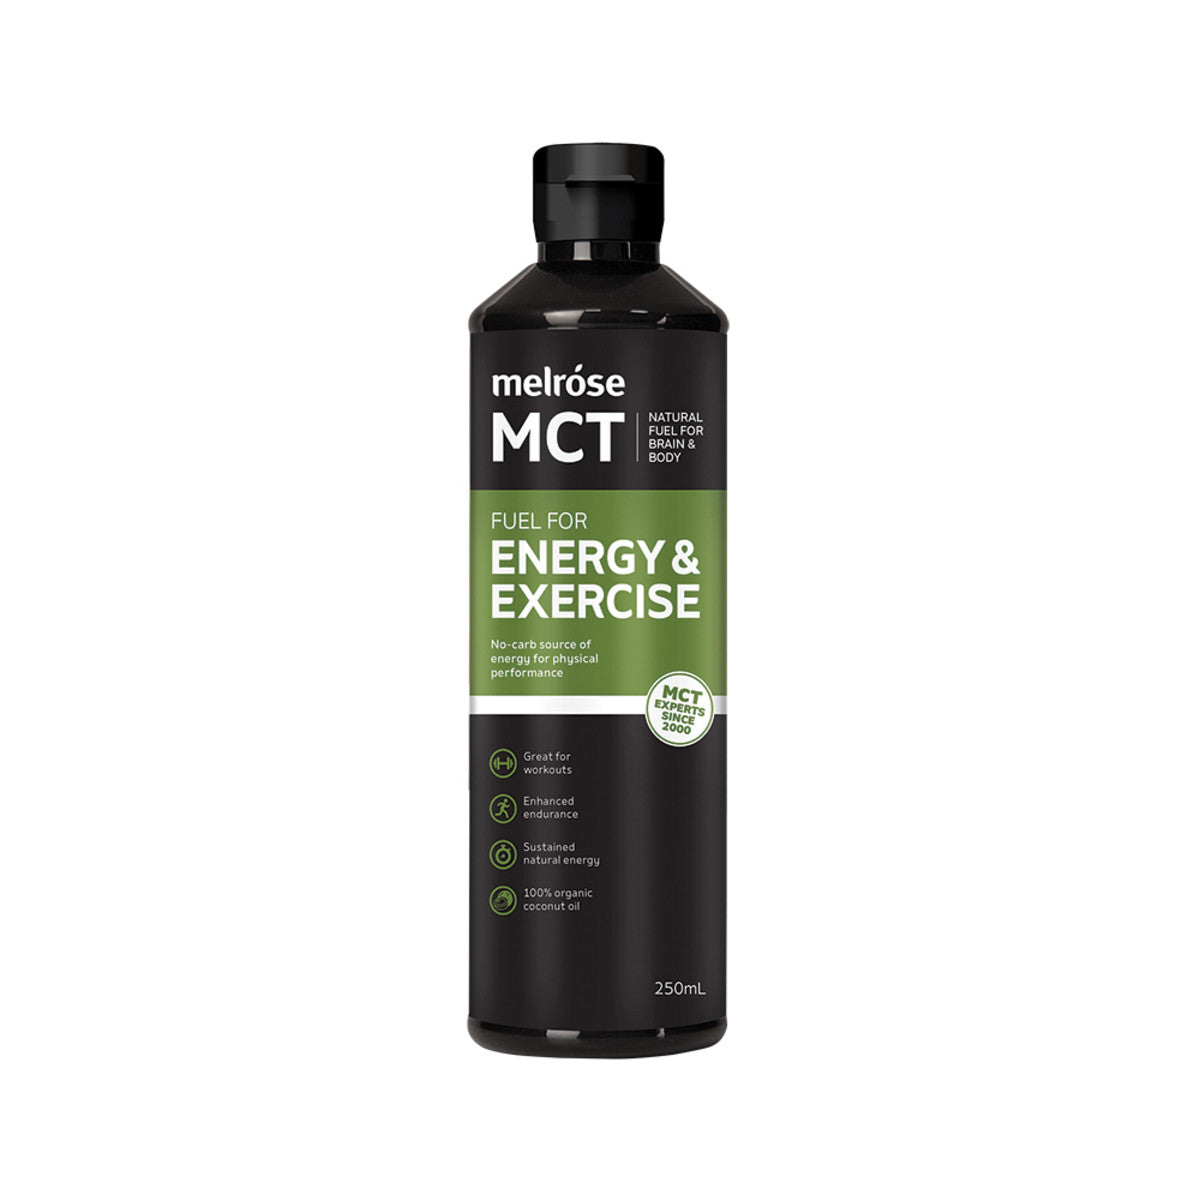 Melrose - MCT Oil Fuel For Energy & Exercise